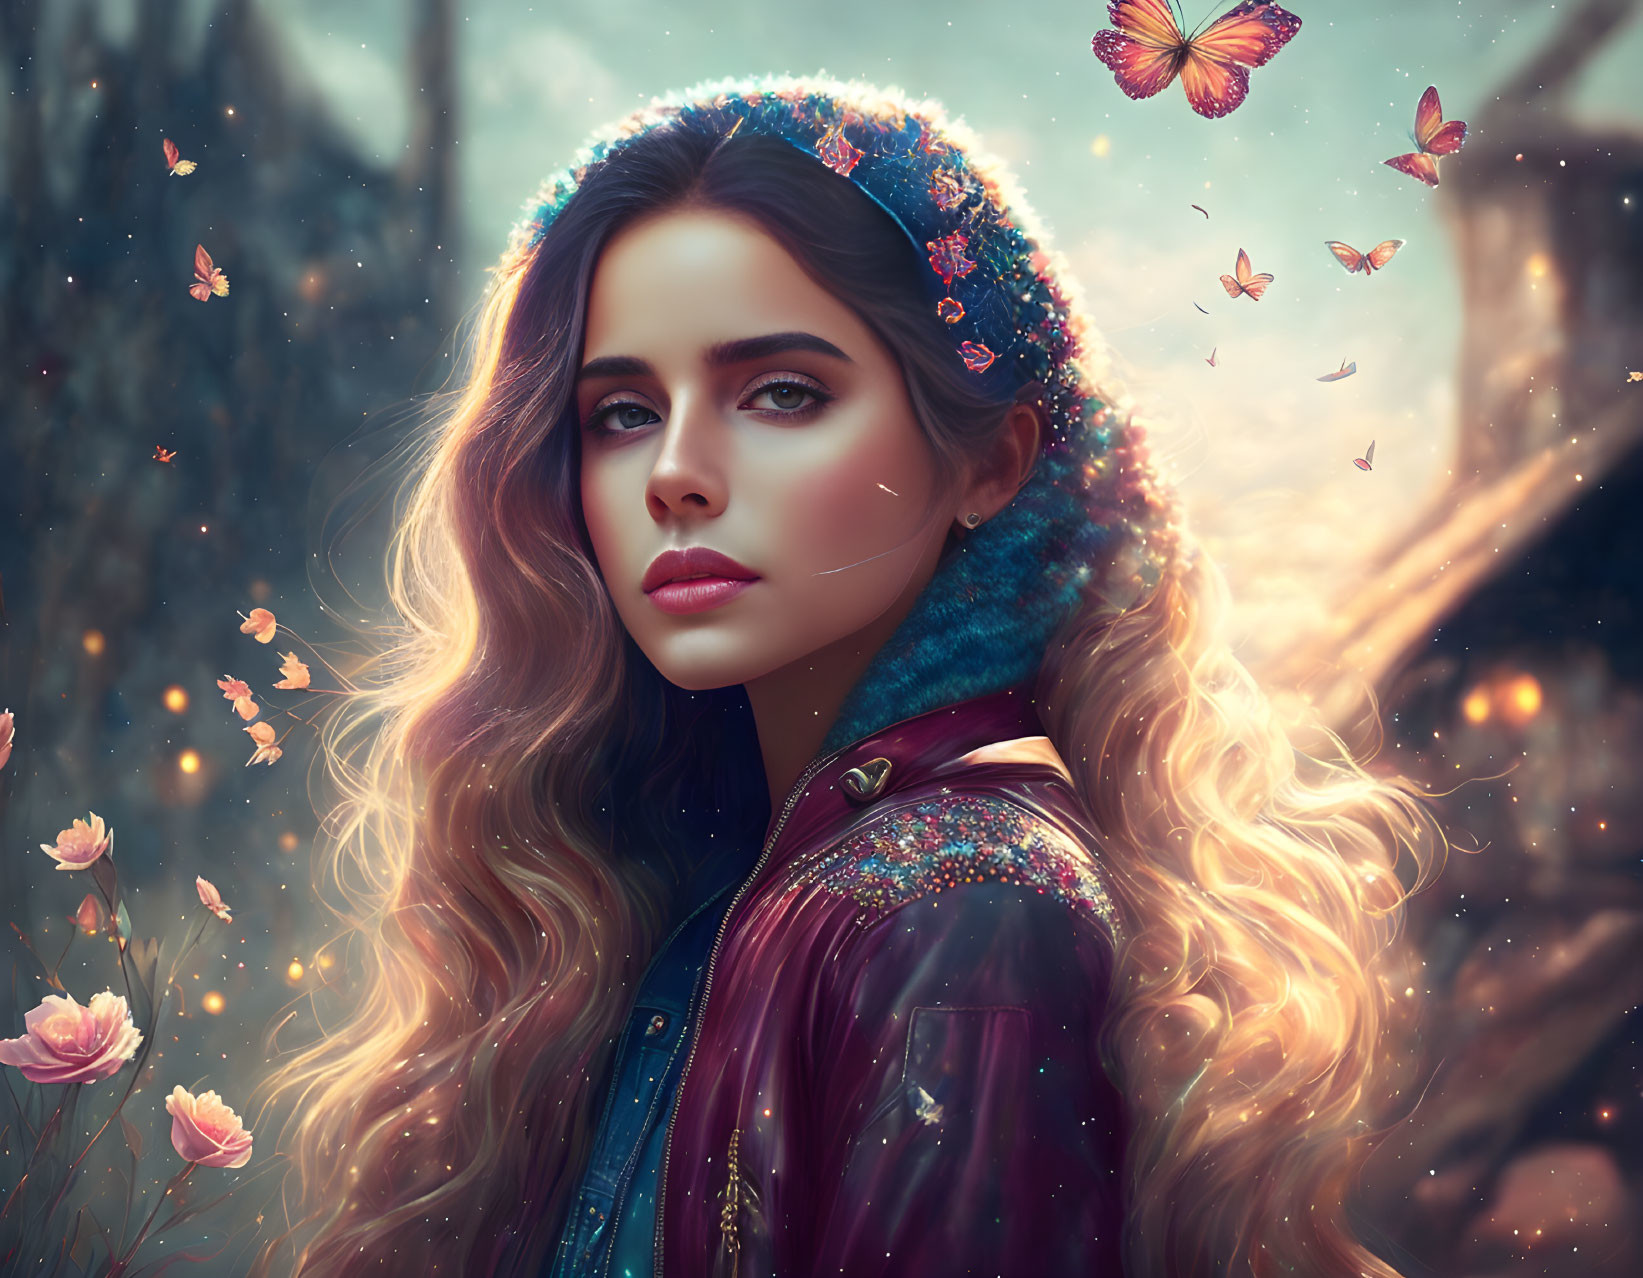 Curly-haired woman surrounded by butterflies in enchanted forest setting